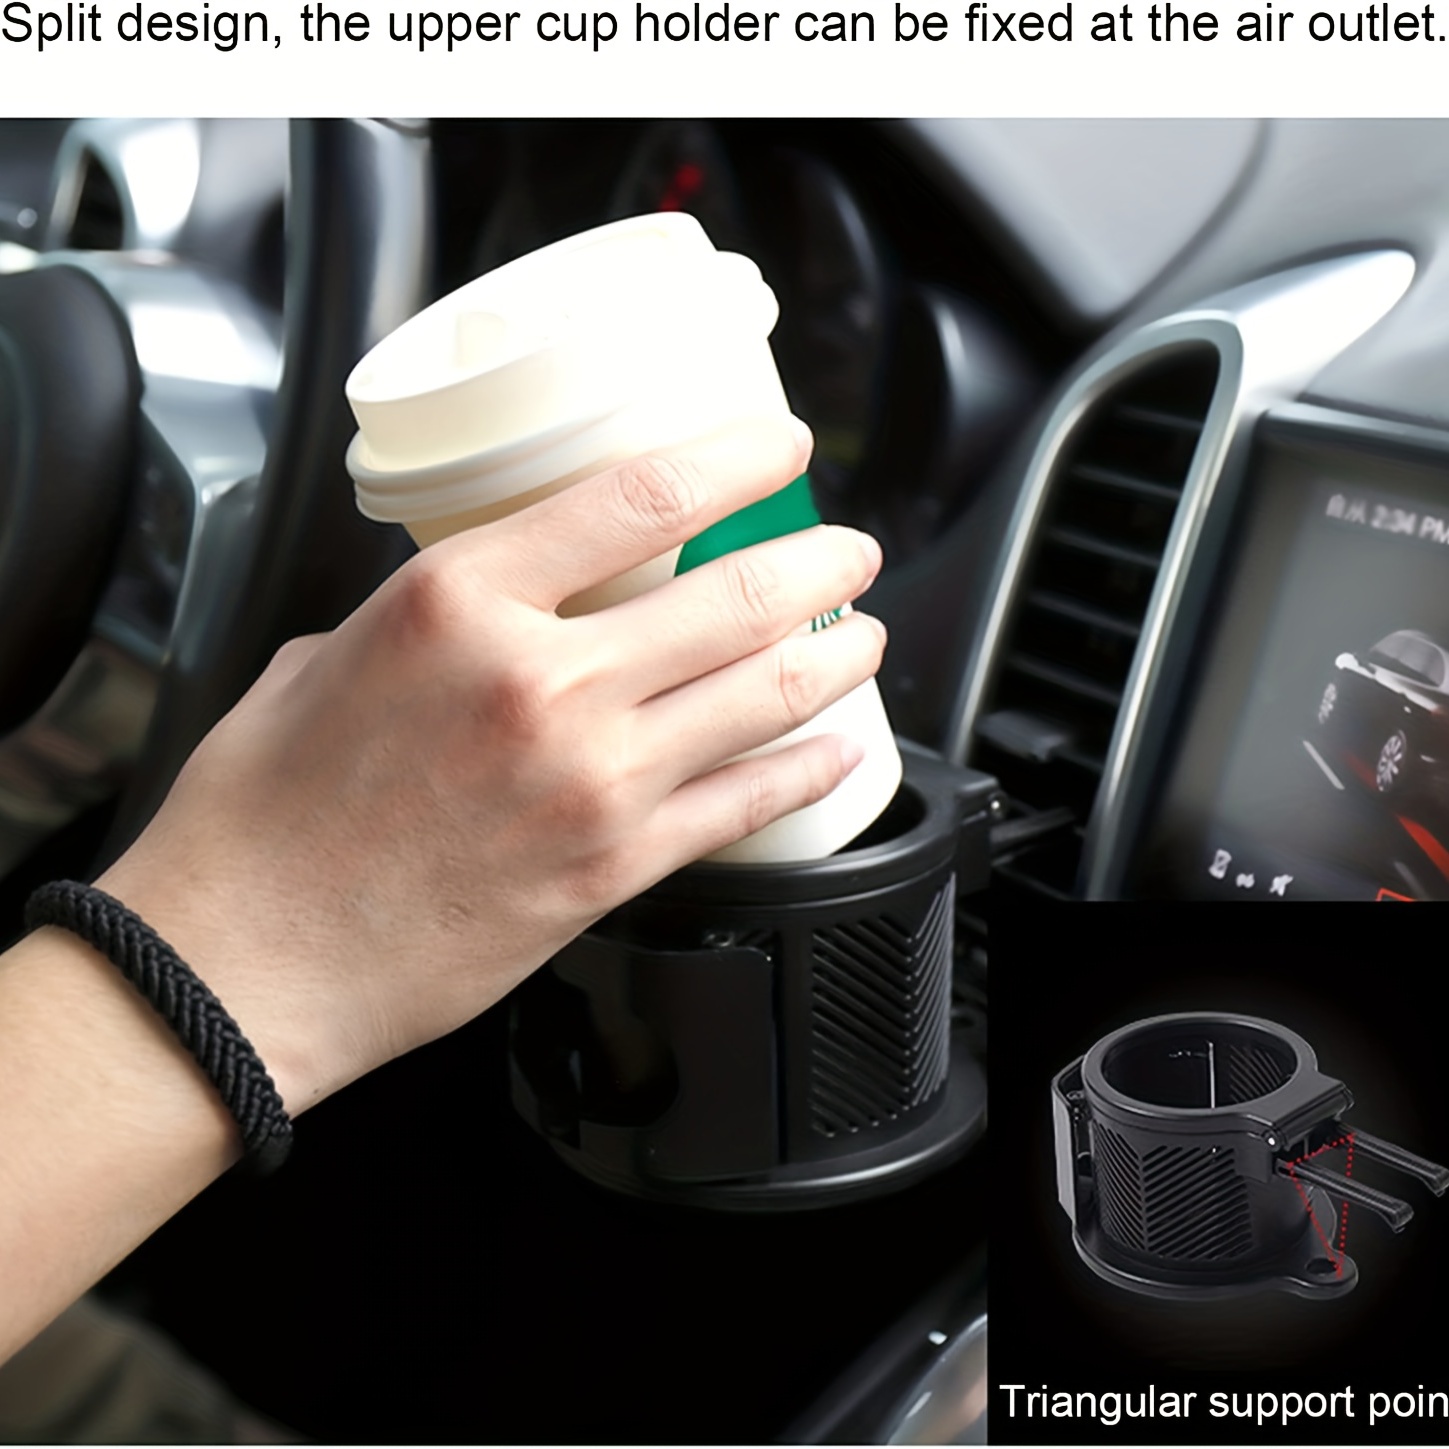  2-in-1 Multifunction Car Drink Expander Adapter, All Purpose  Car Cup Holder Expander with Adjustable, Solar Grass Cup Holder Expander for  Most Cars (Cup Holder 2-in-1) : Automotive